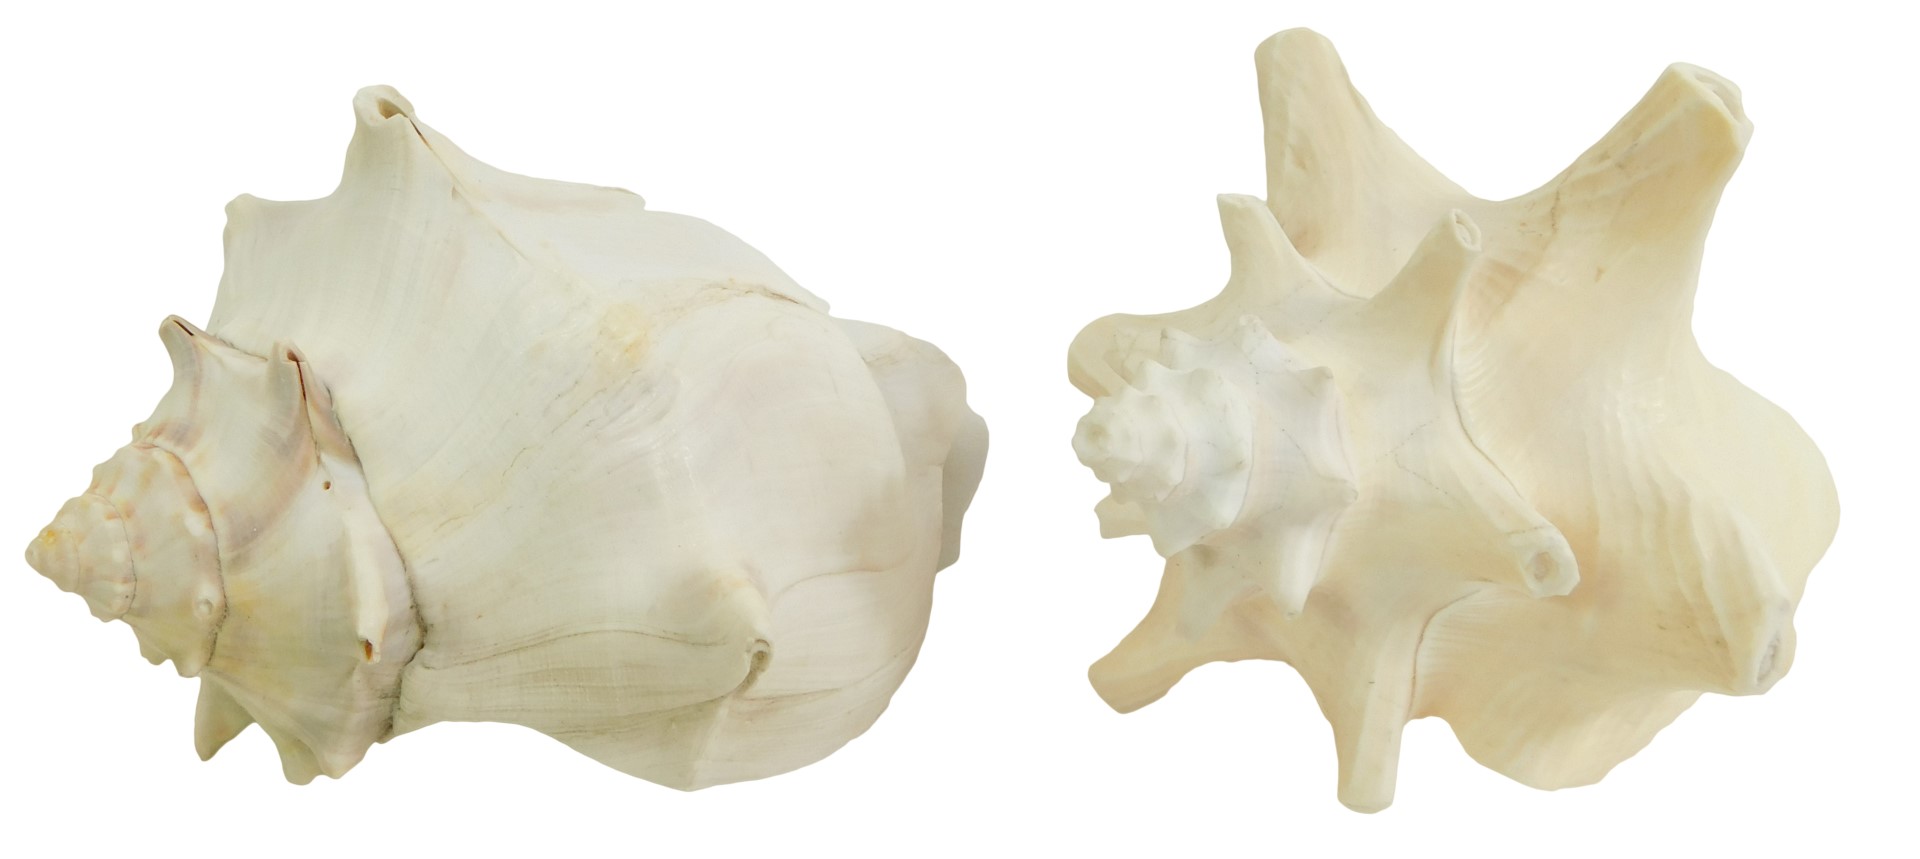 Two conch shells, 17cm and 16cm long.